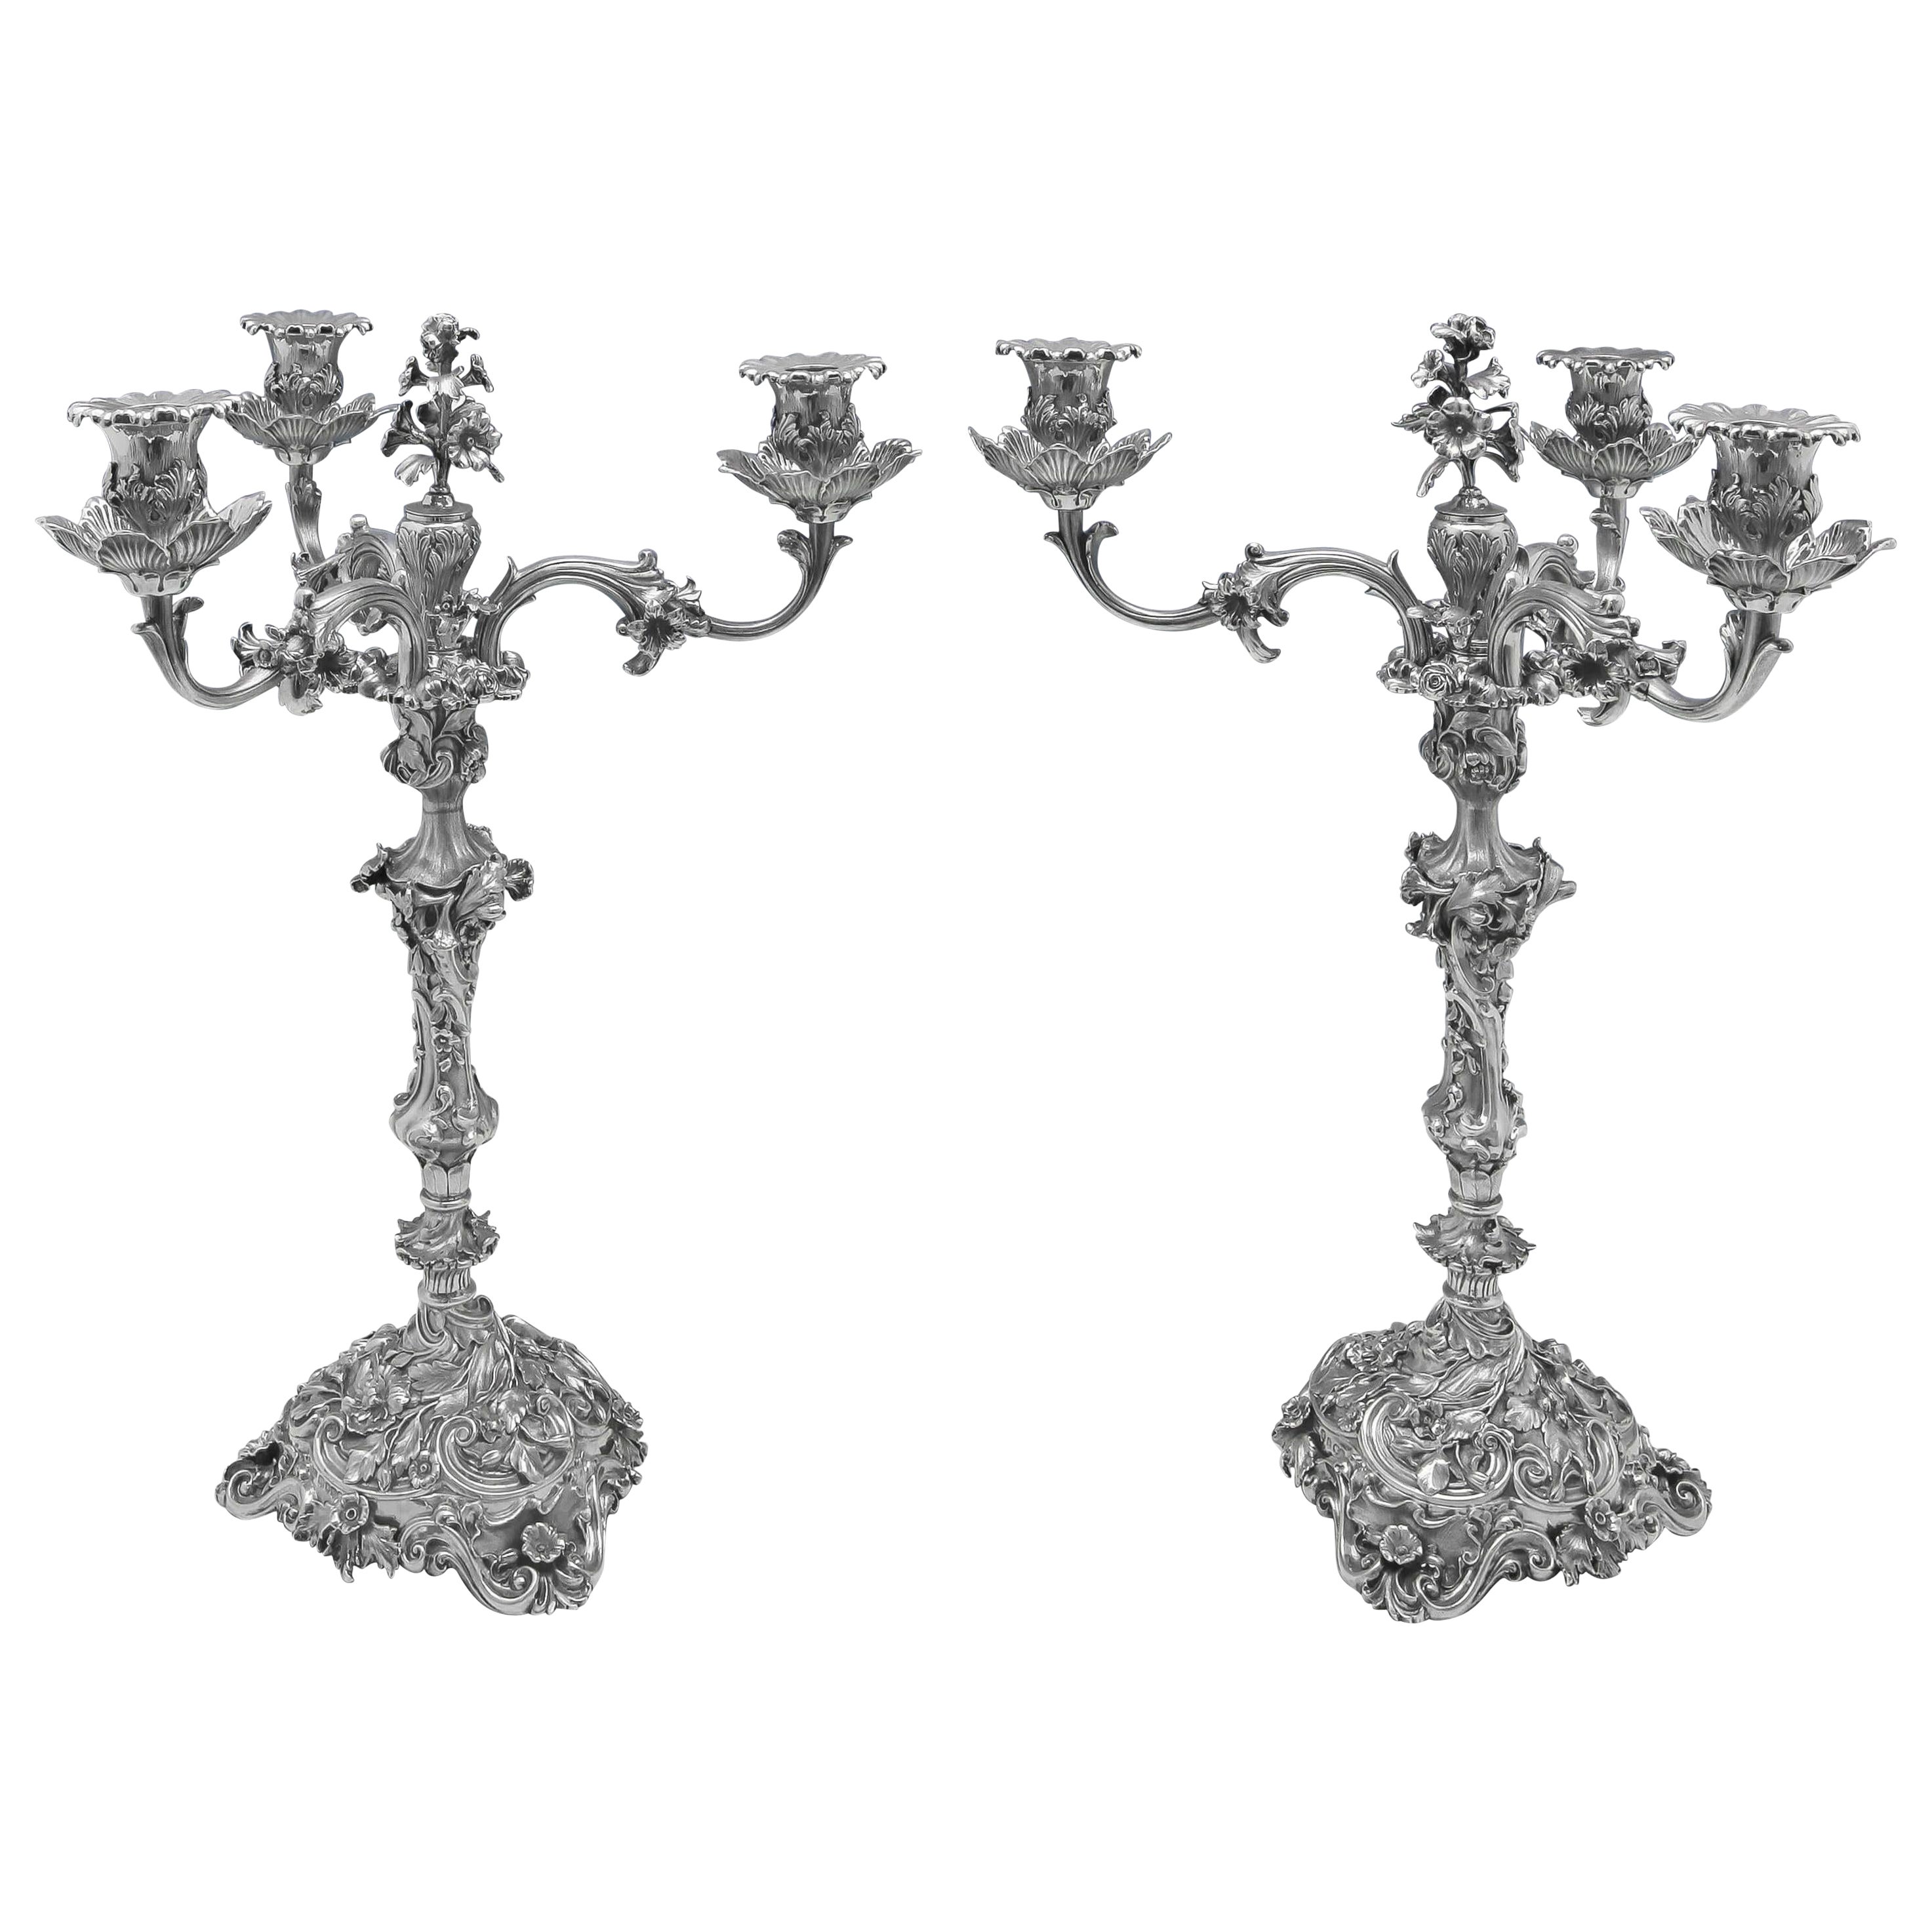 Stunning Pair of Rococo Design Sterling Silver Candelabra - Hennell London 1870 For Sale